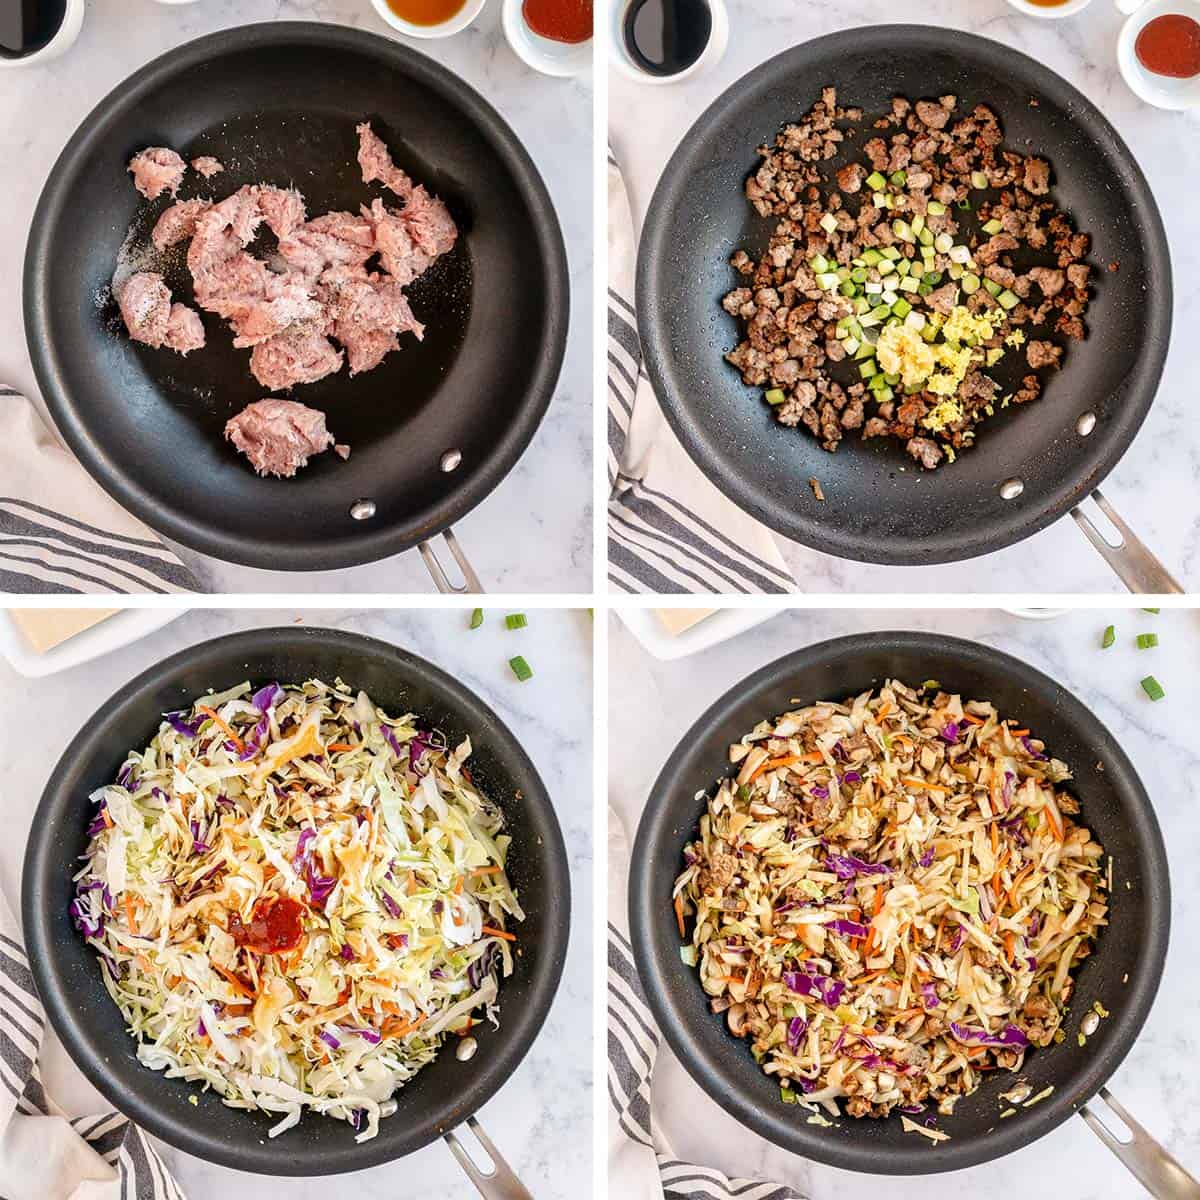 Ground pork and coleslaw mix is made into egg roll filling in a skillet.